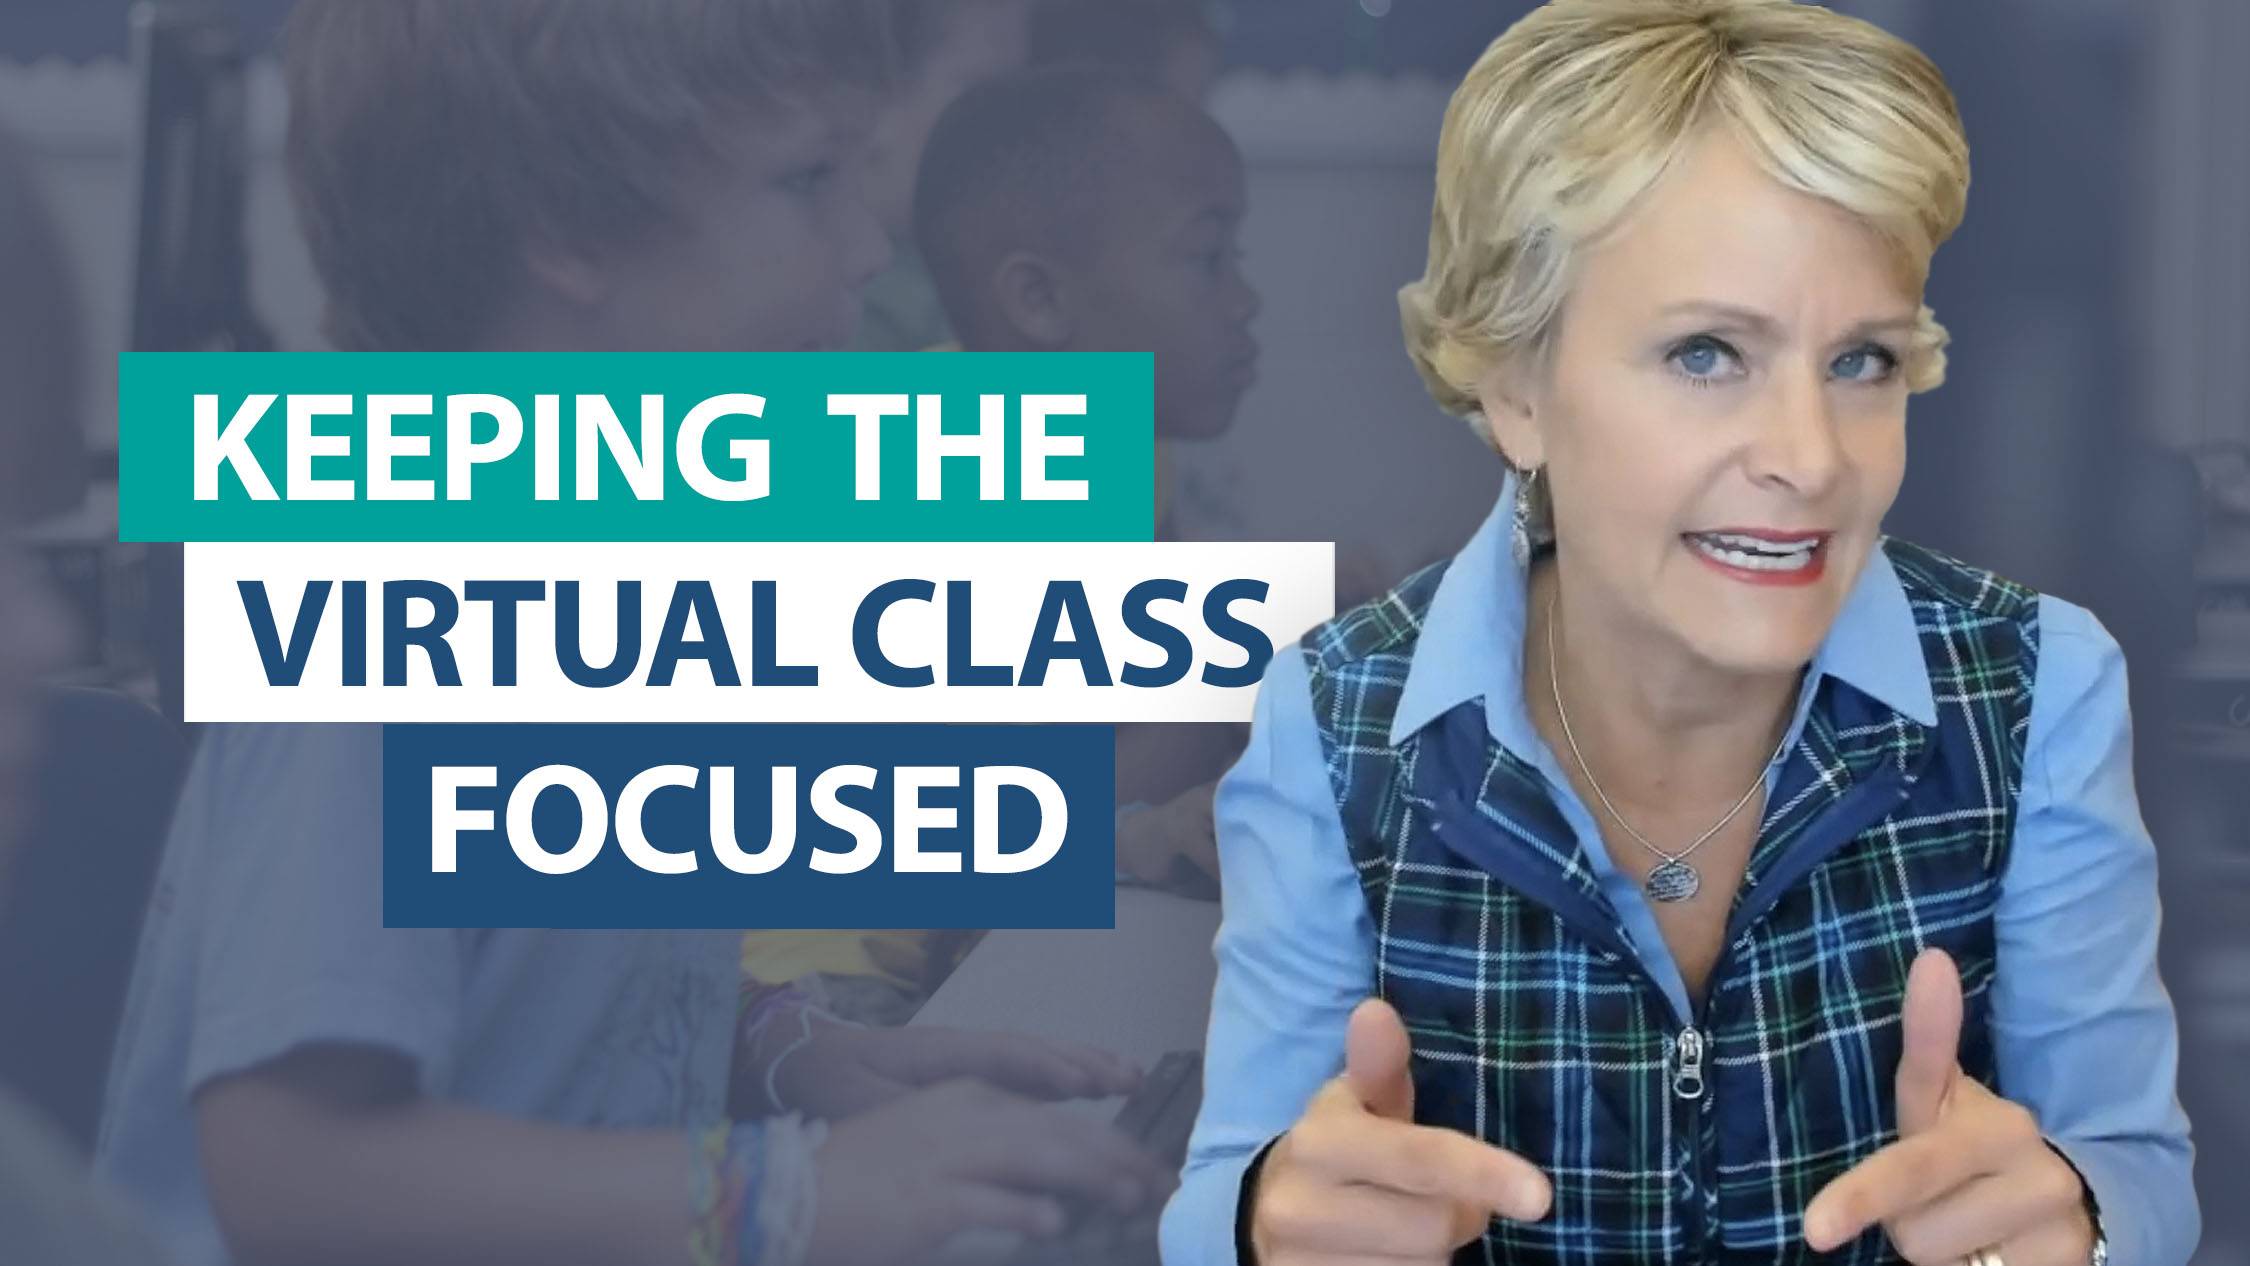 How can I keep my kids focused during whole-class lessons?